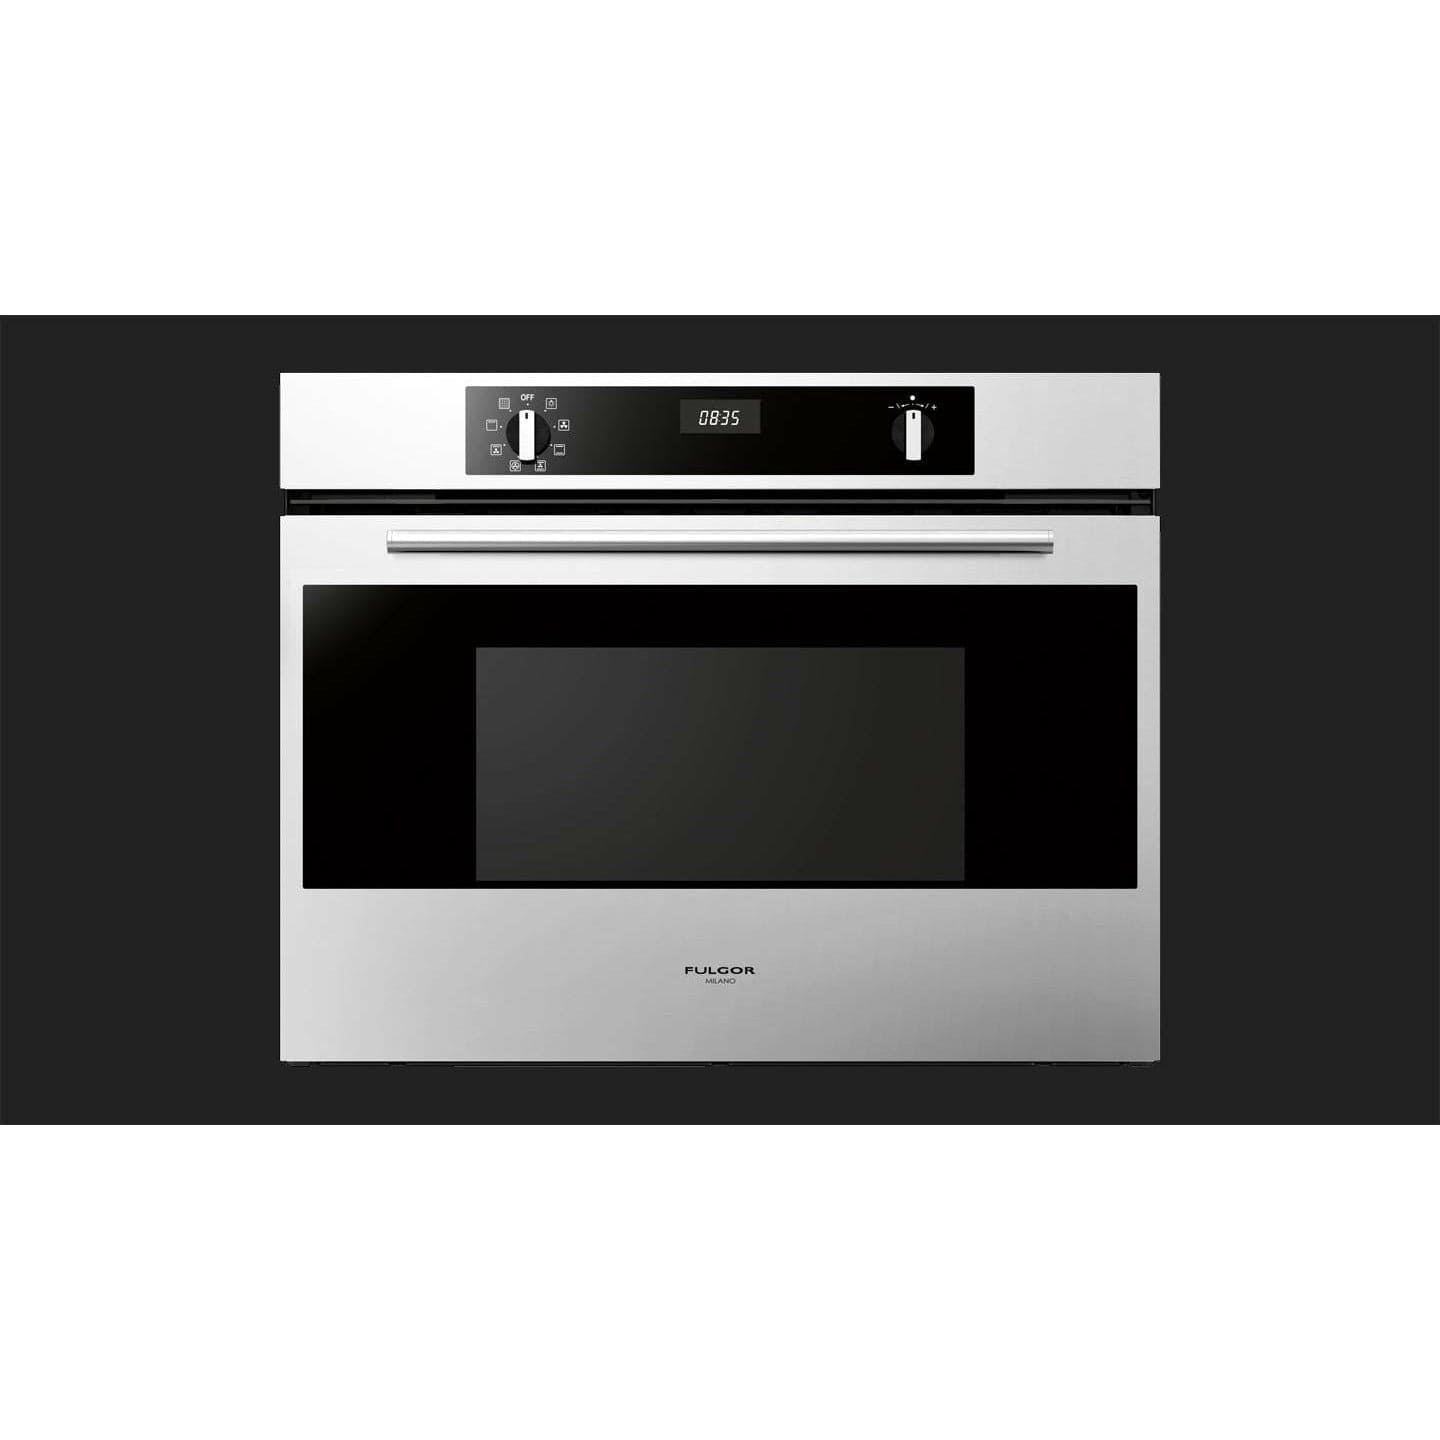 Fulgor Milano 30" Convection Electric Oven with 3.0 cu. ft. Oven Capacity - F1SP30S3 Ovens F1SP30S3 Luxury Appliances Direct